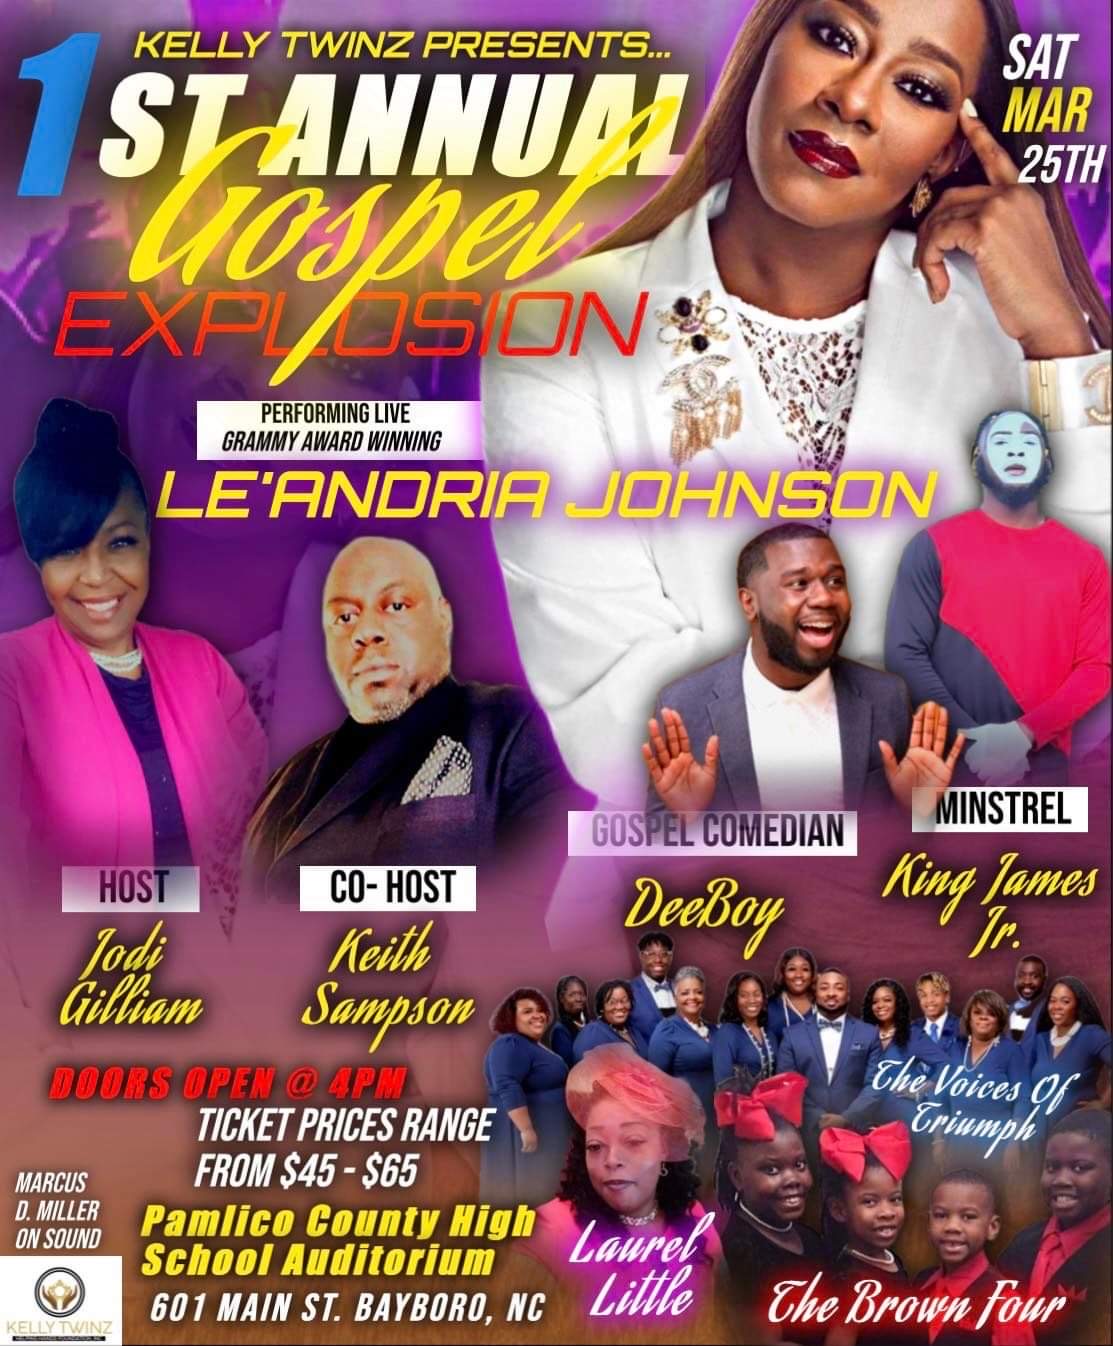 Kelly Twinz Presents: The 1st Annual Gospel Explosion